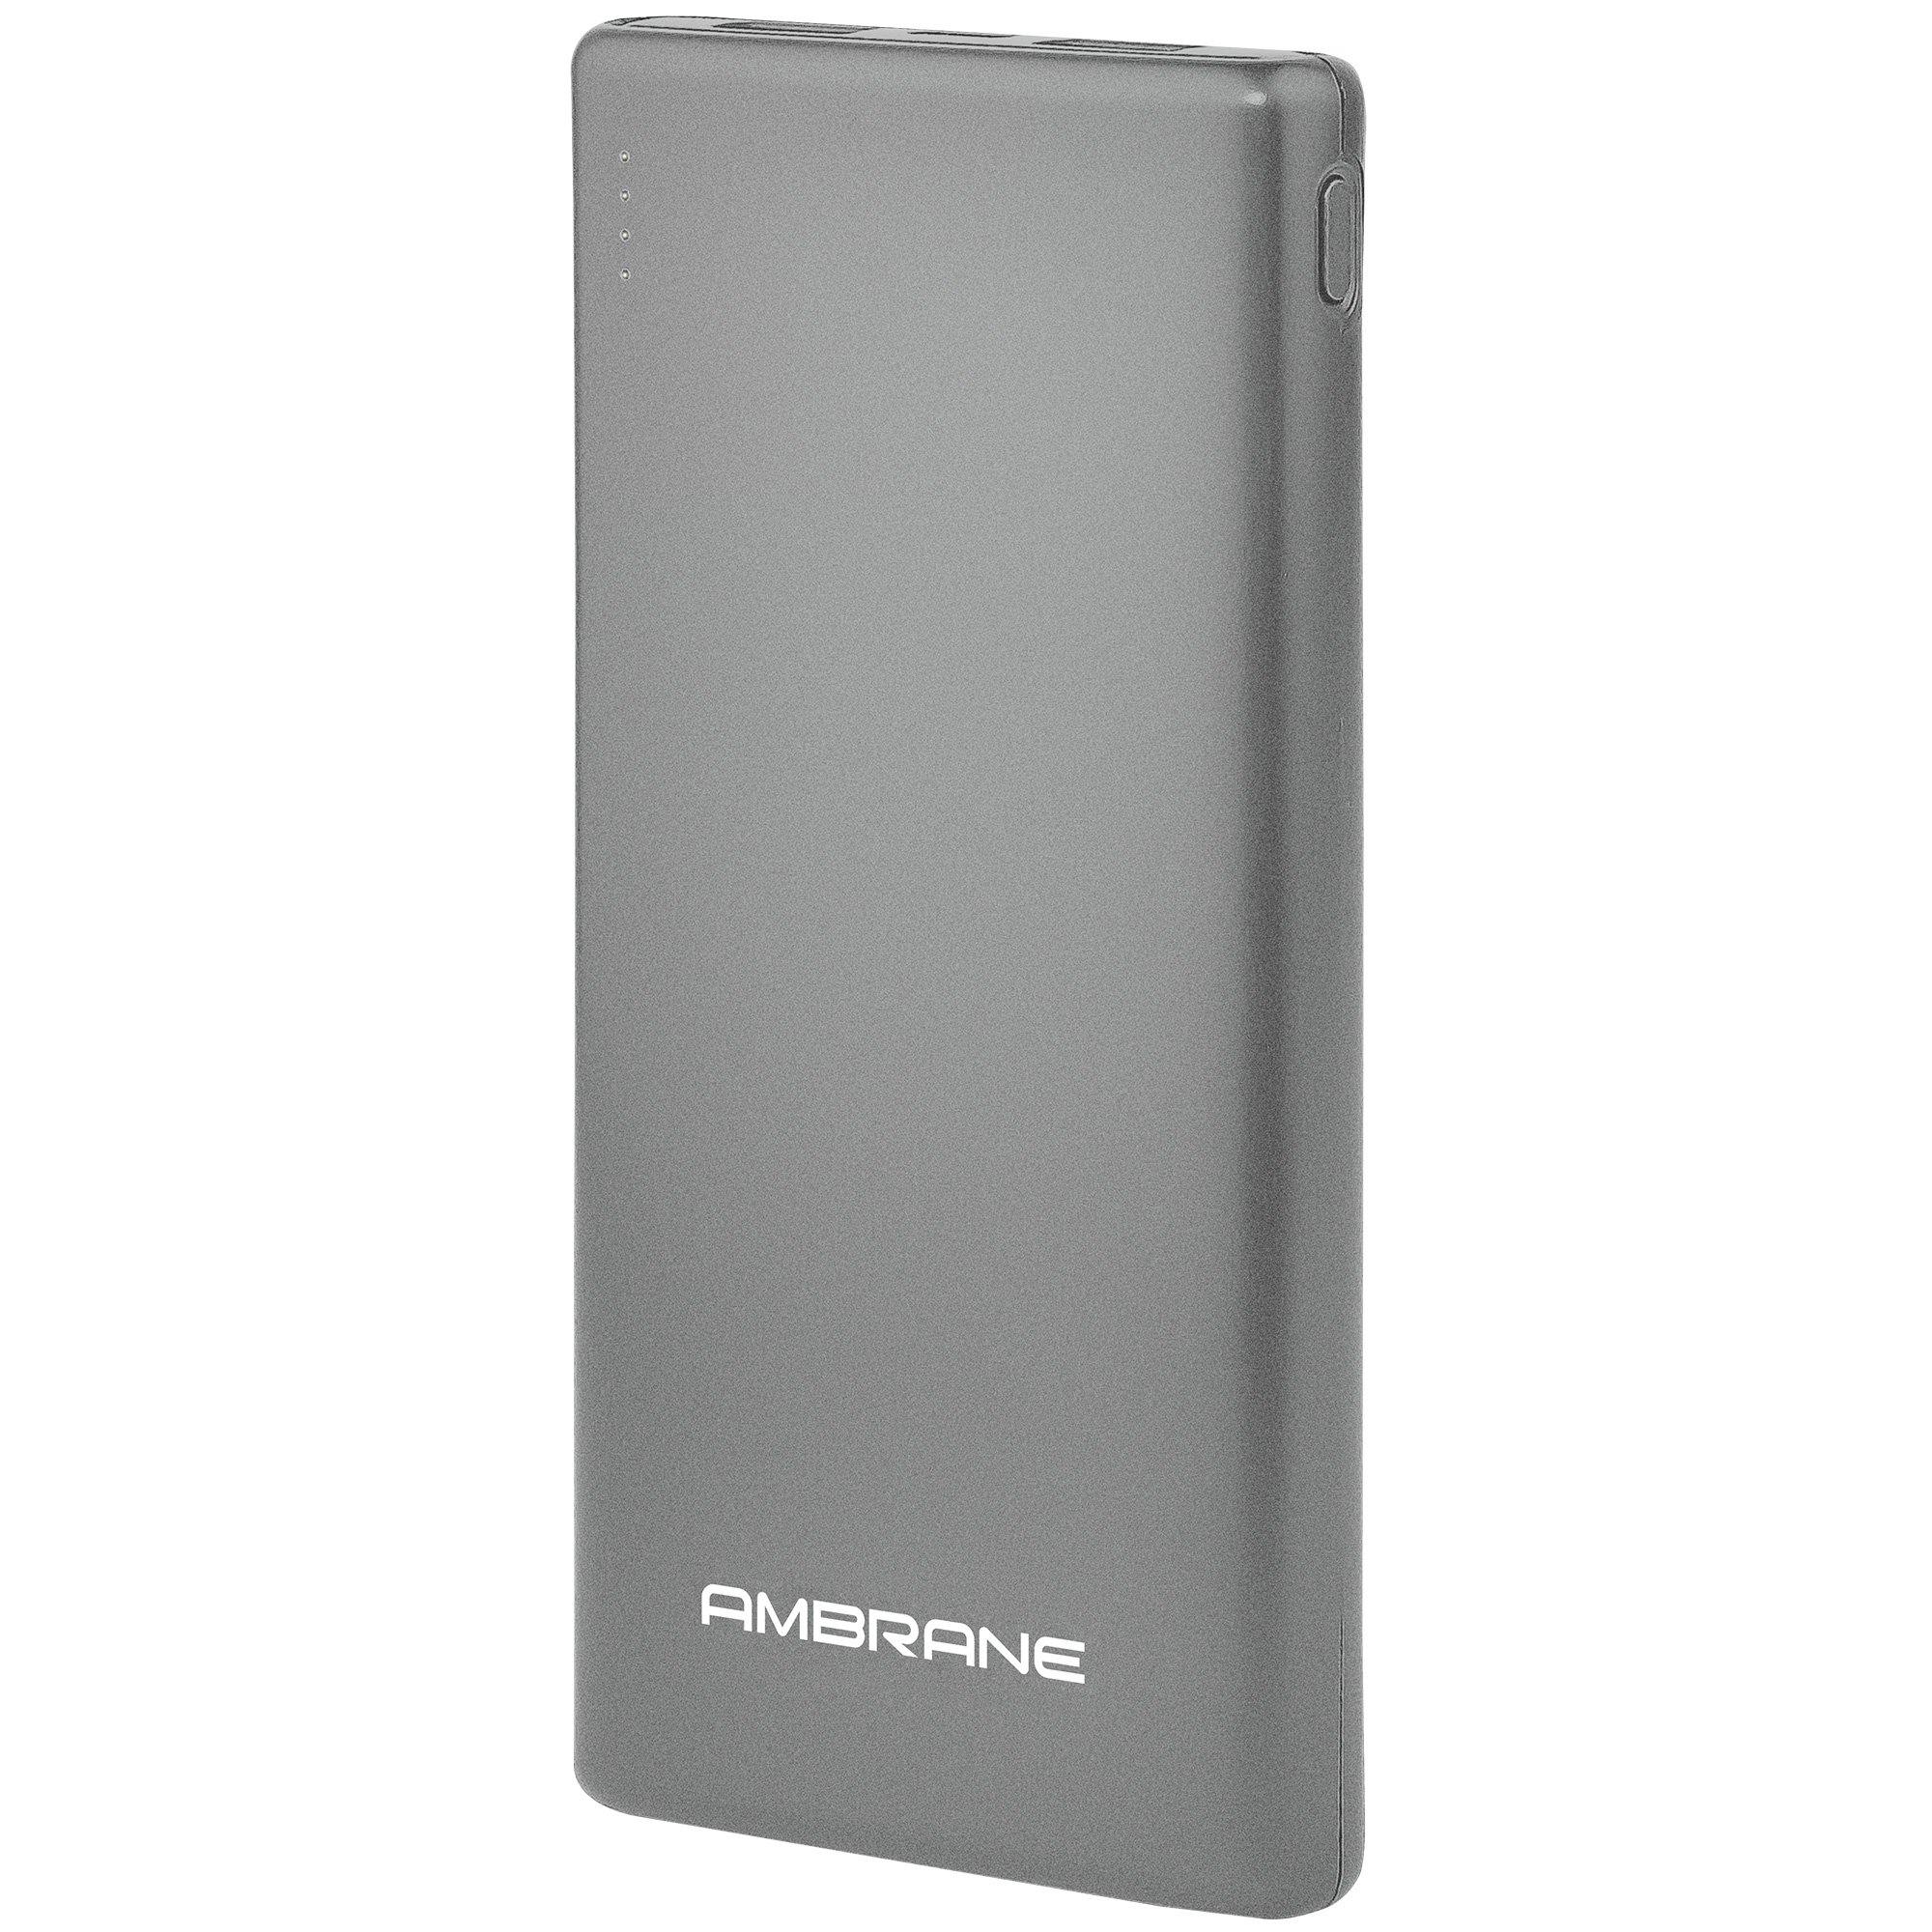 PP-125 10,000 mAh Lithium Polymer Power Bank (Silver), Power Bank Price in India - AmbraneIndia